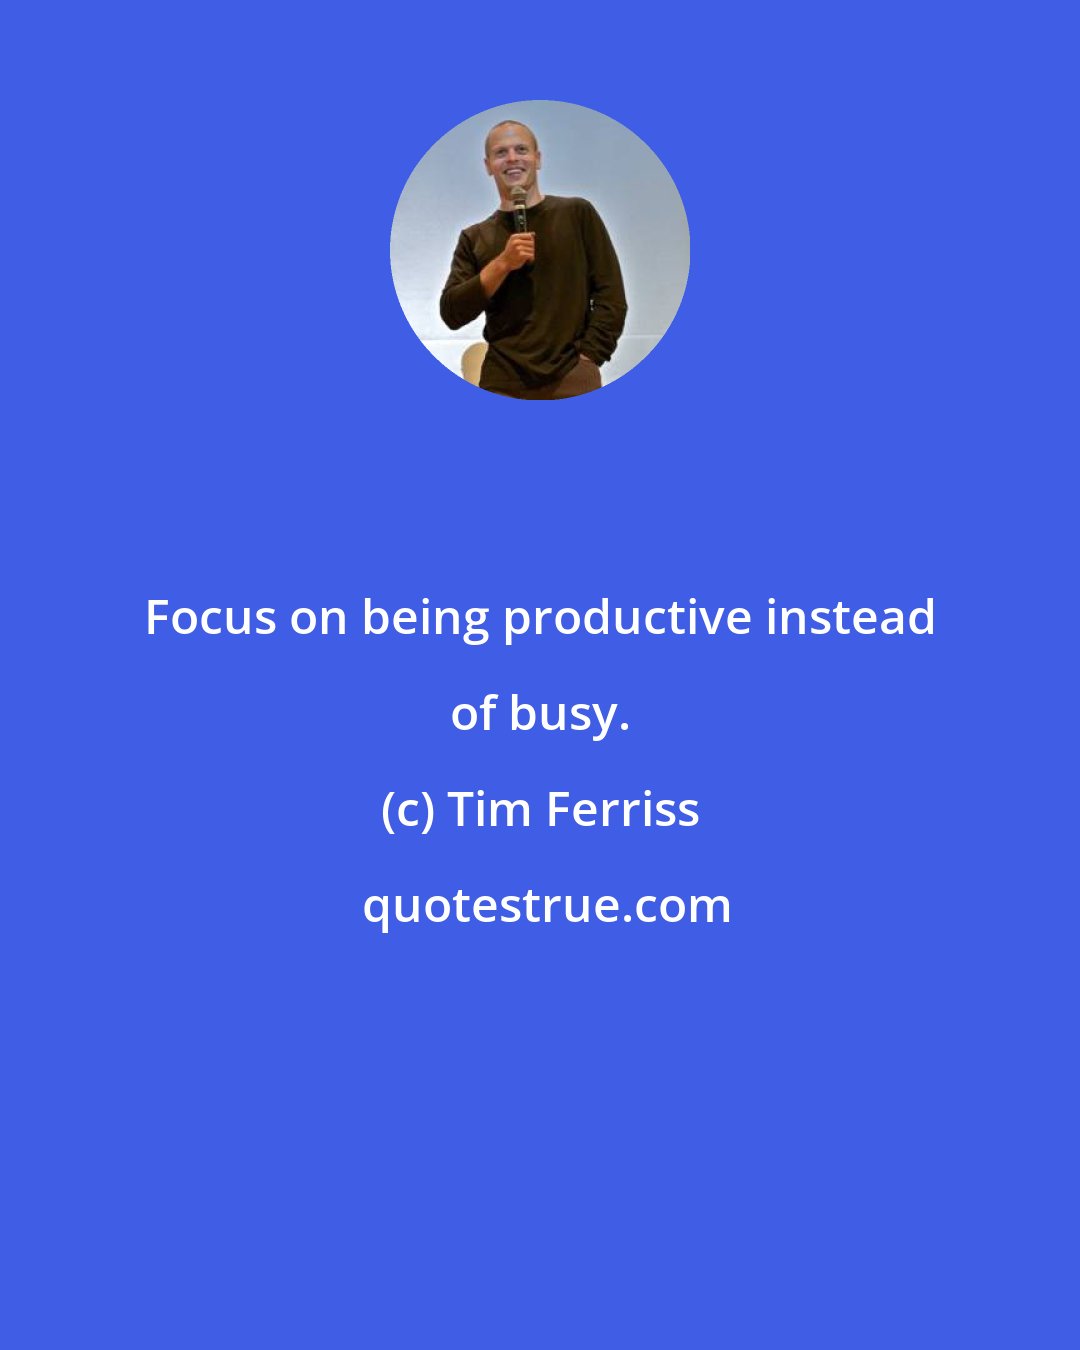 Tim Ferriss: Focus on being productive instead of busy.